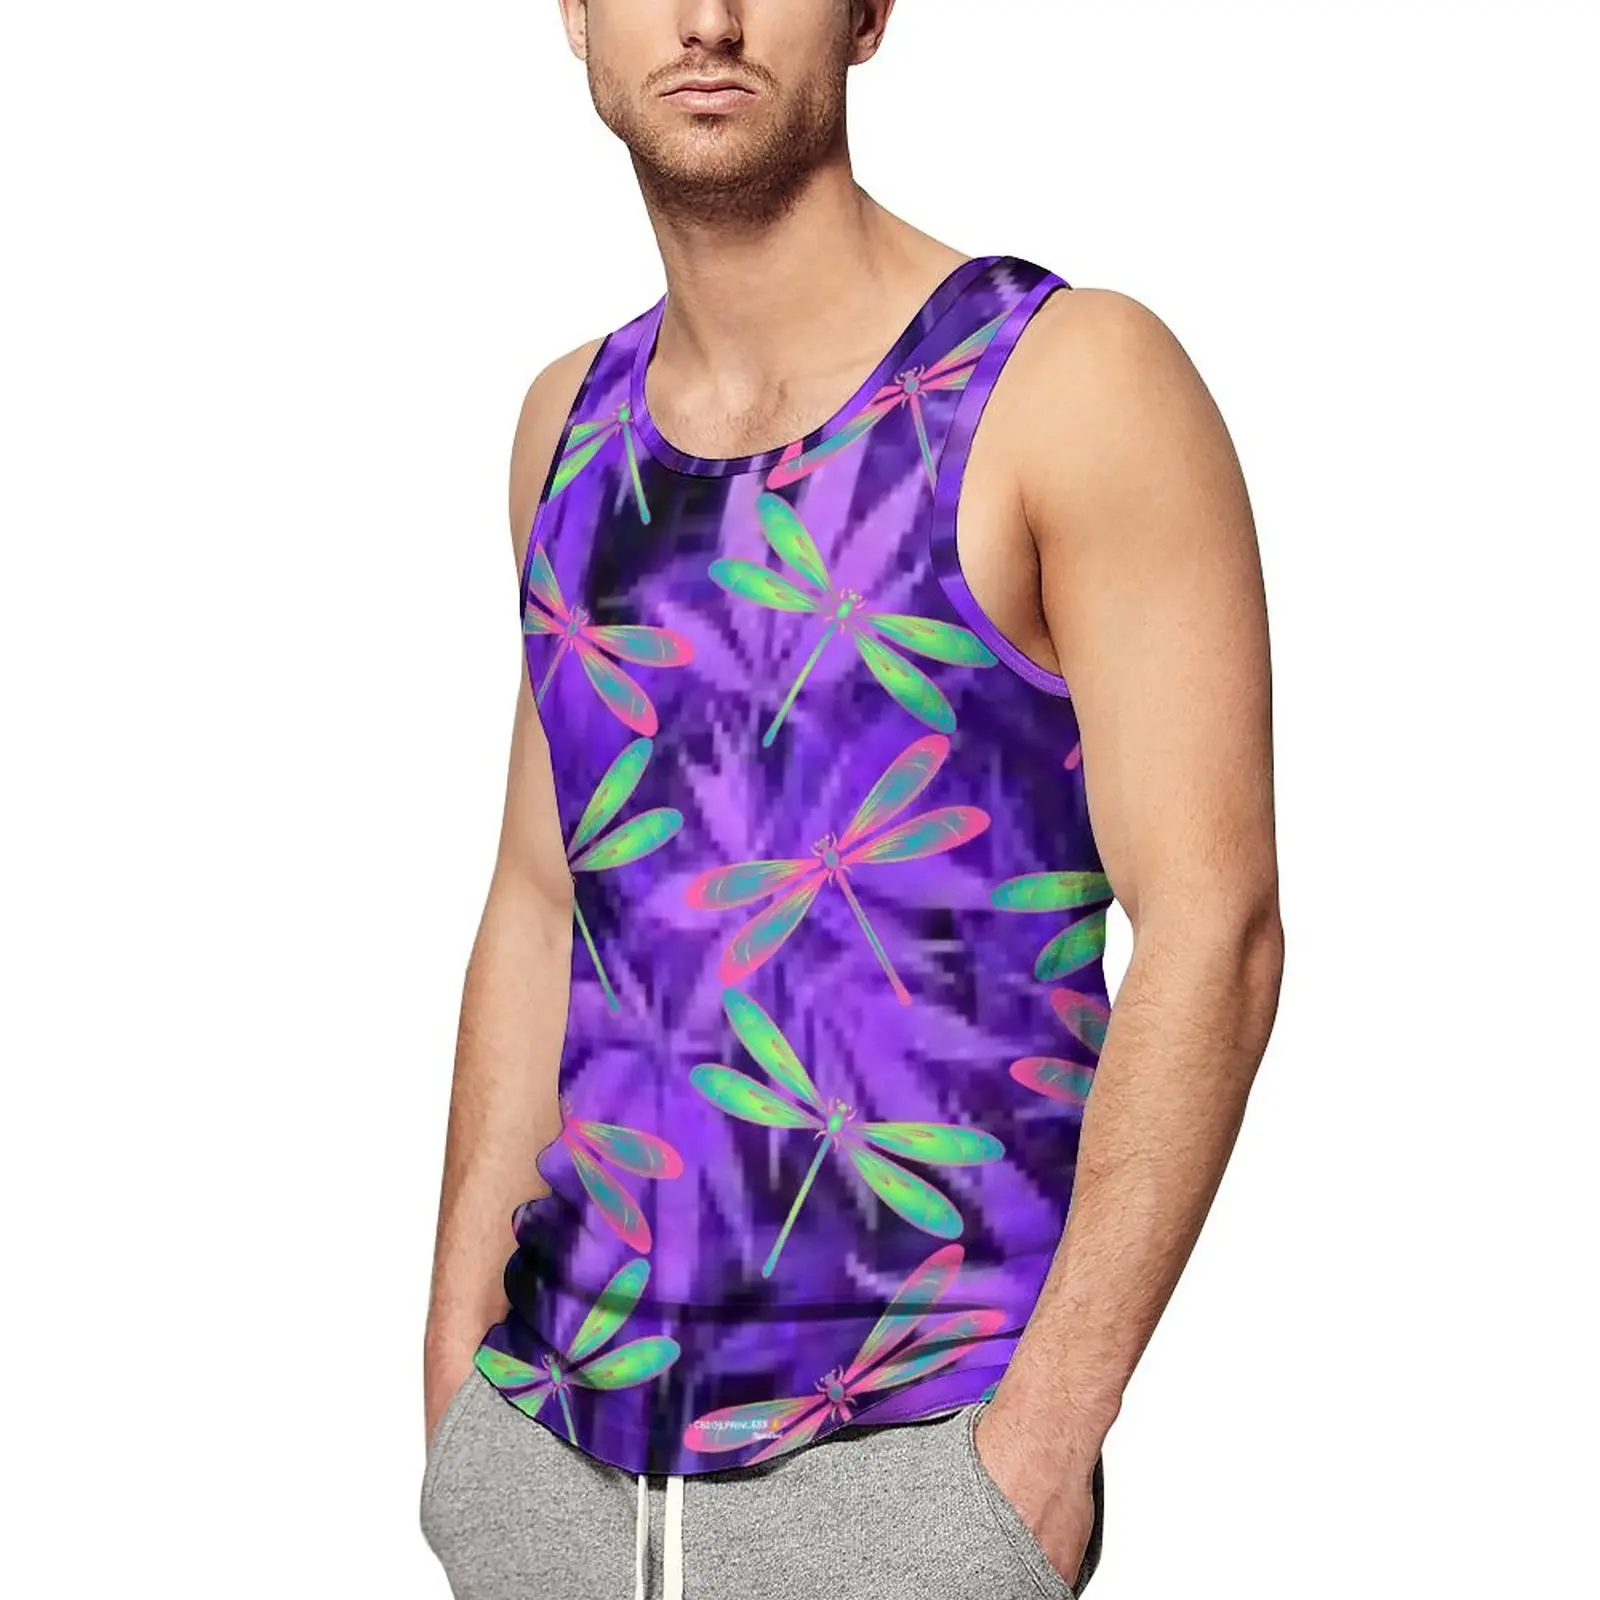 

Dragonfly Print Tank Top Man Colorful Animal Training Oversized Tops Beach Fashion Graphic Sleeveless Vests